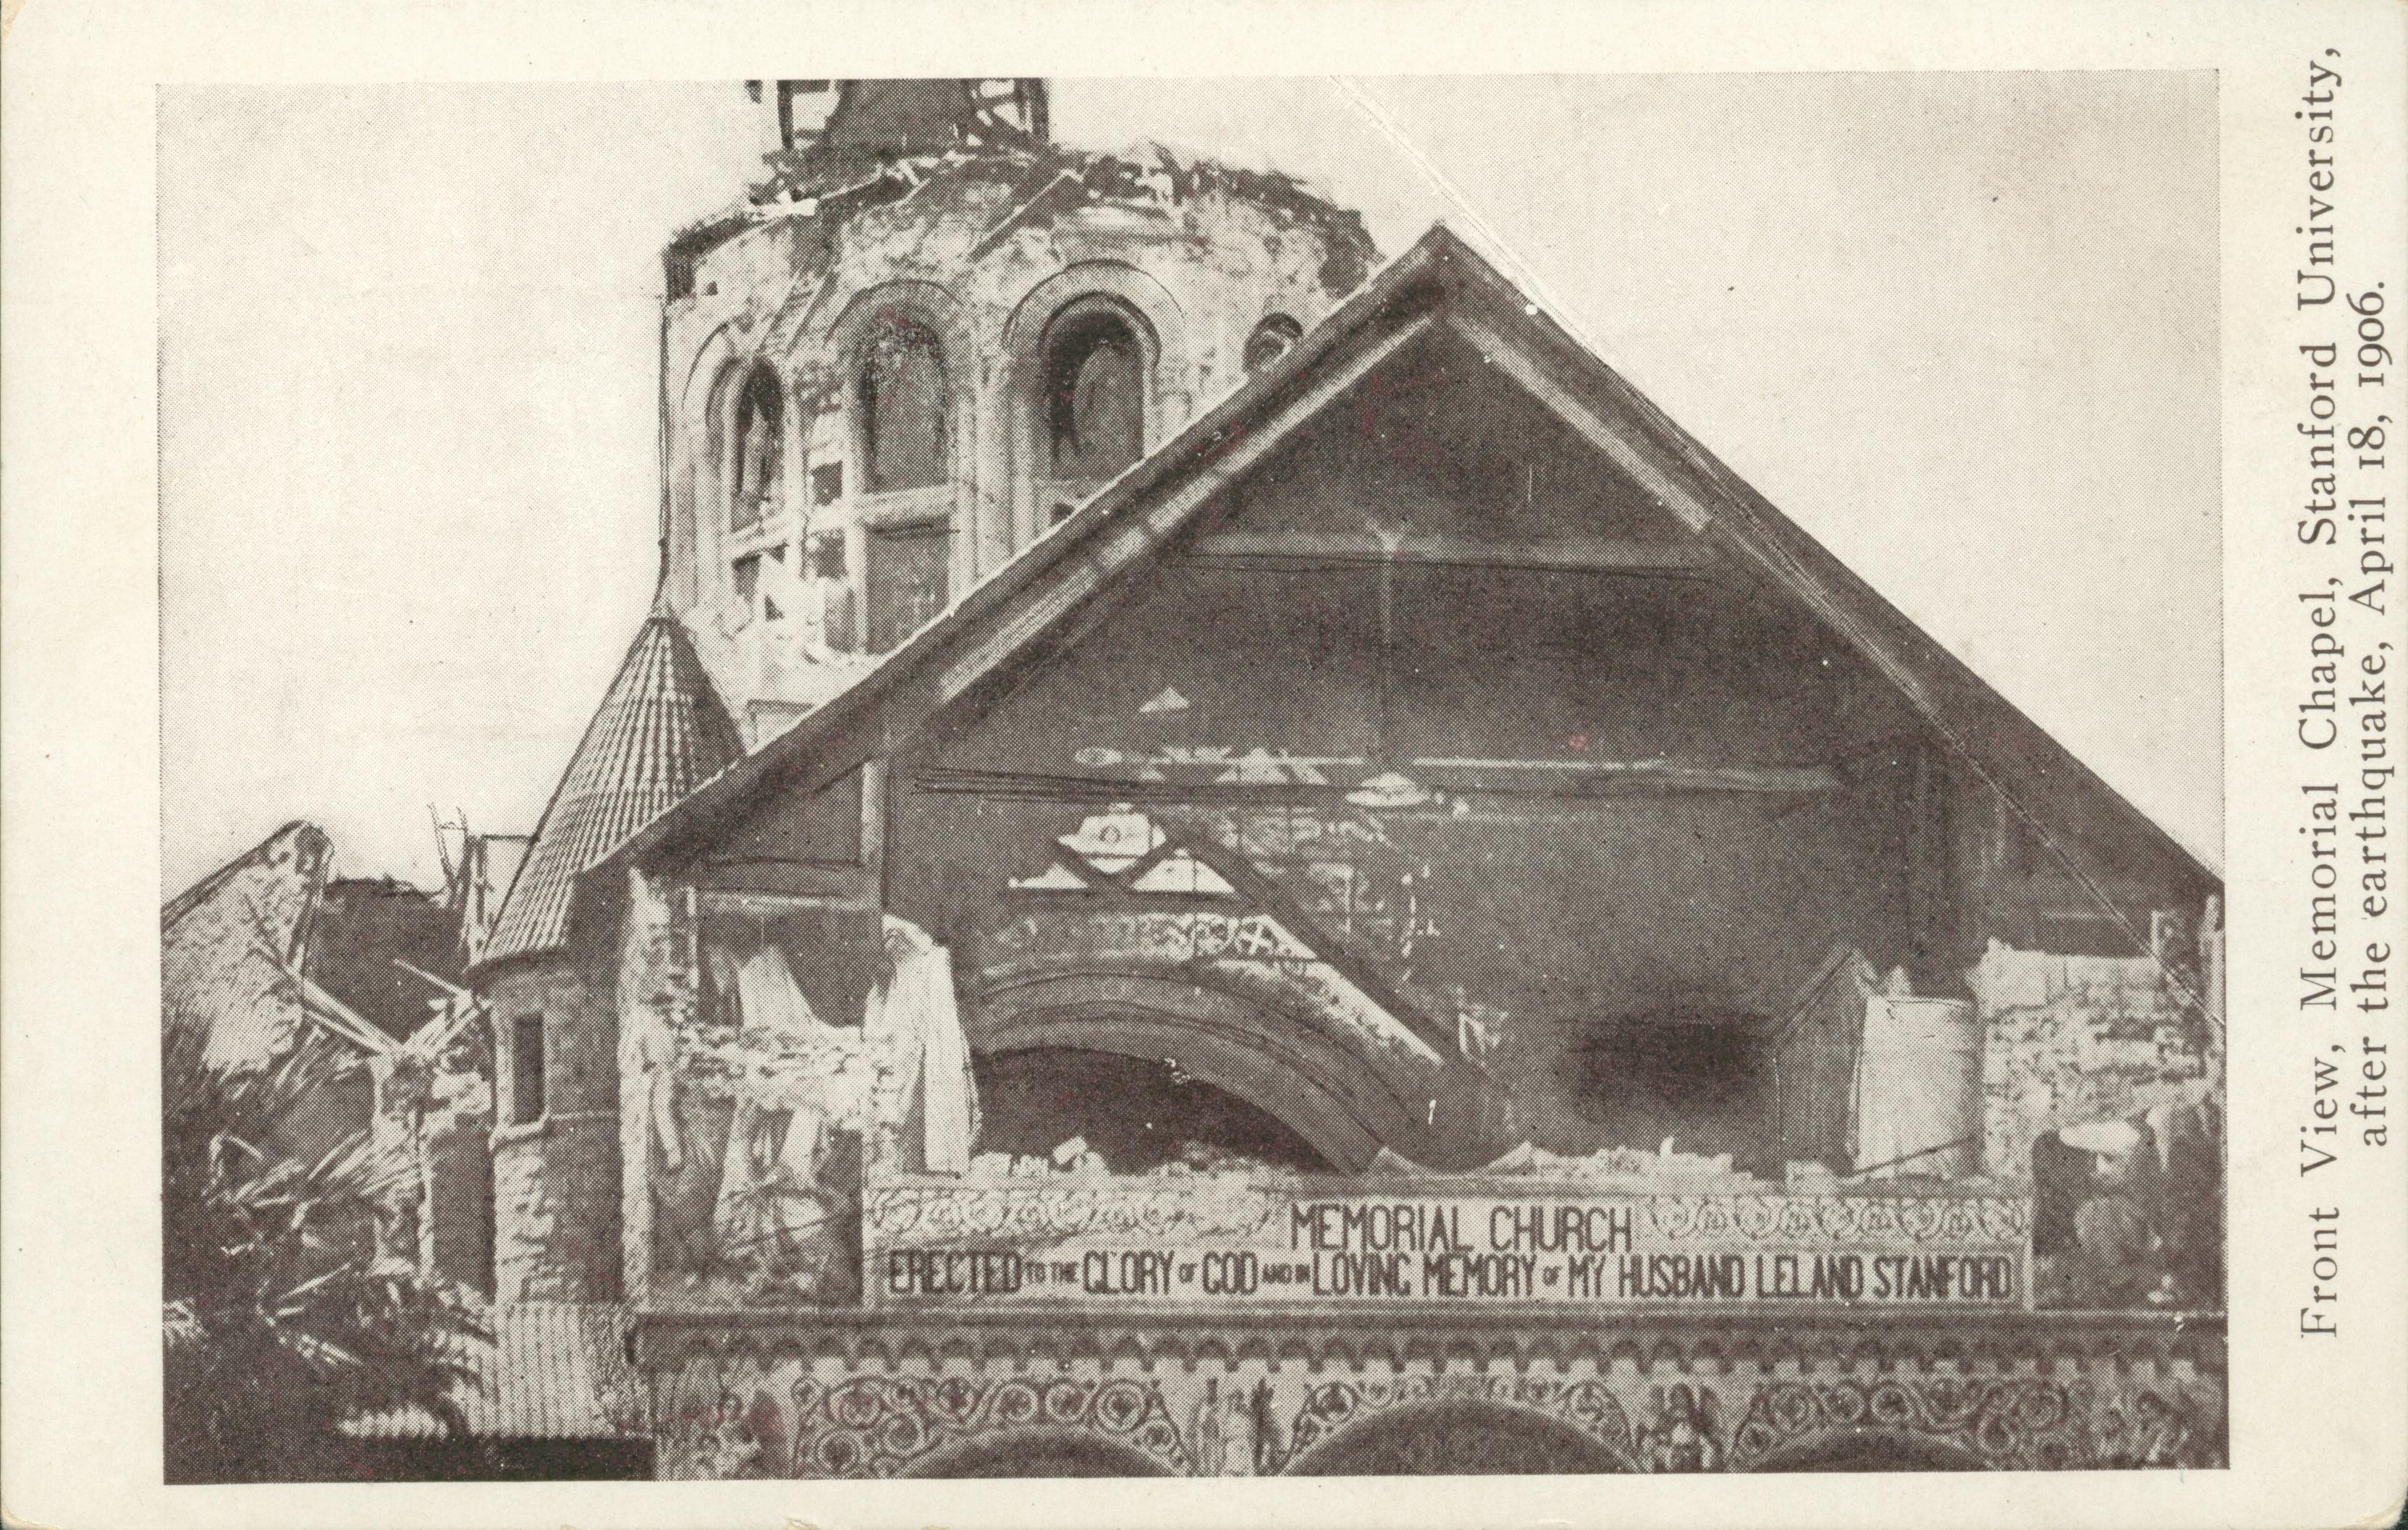 View of the destroyed exterior of Memorial Church after the destructive earthquake of 1906